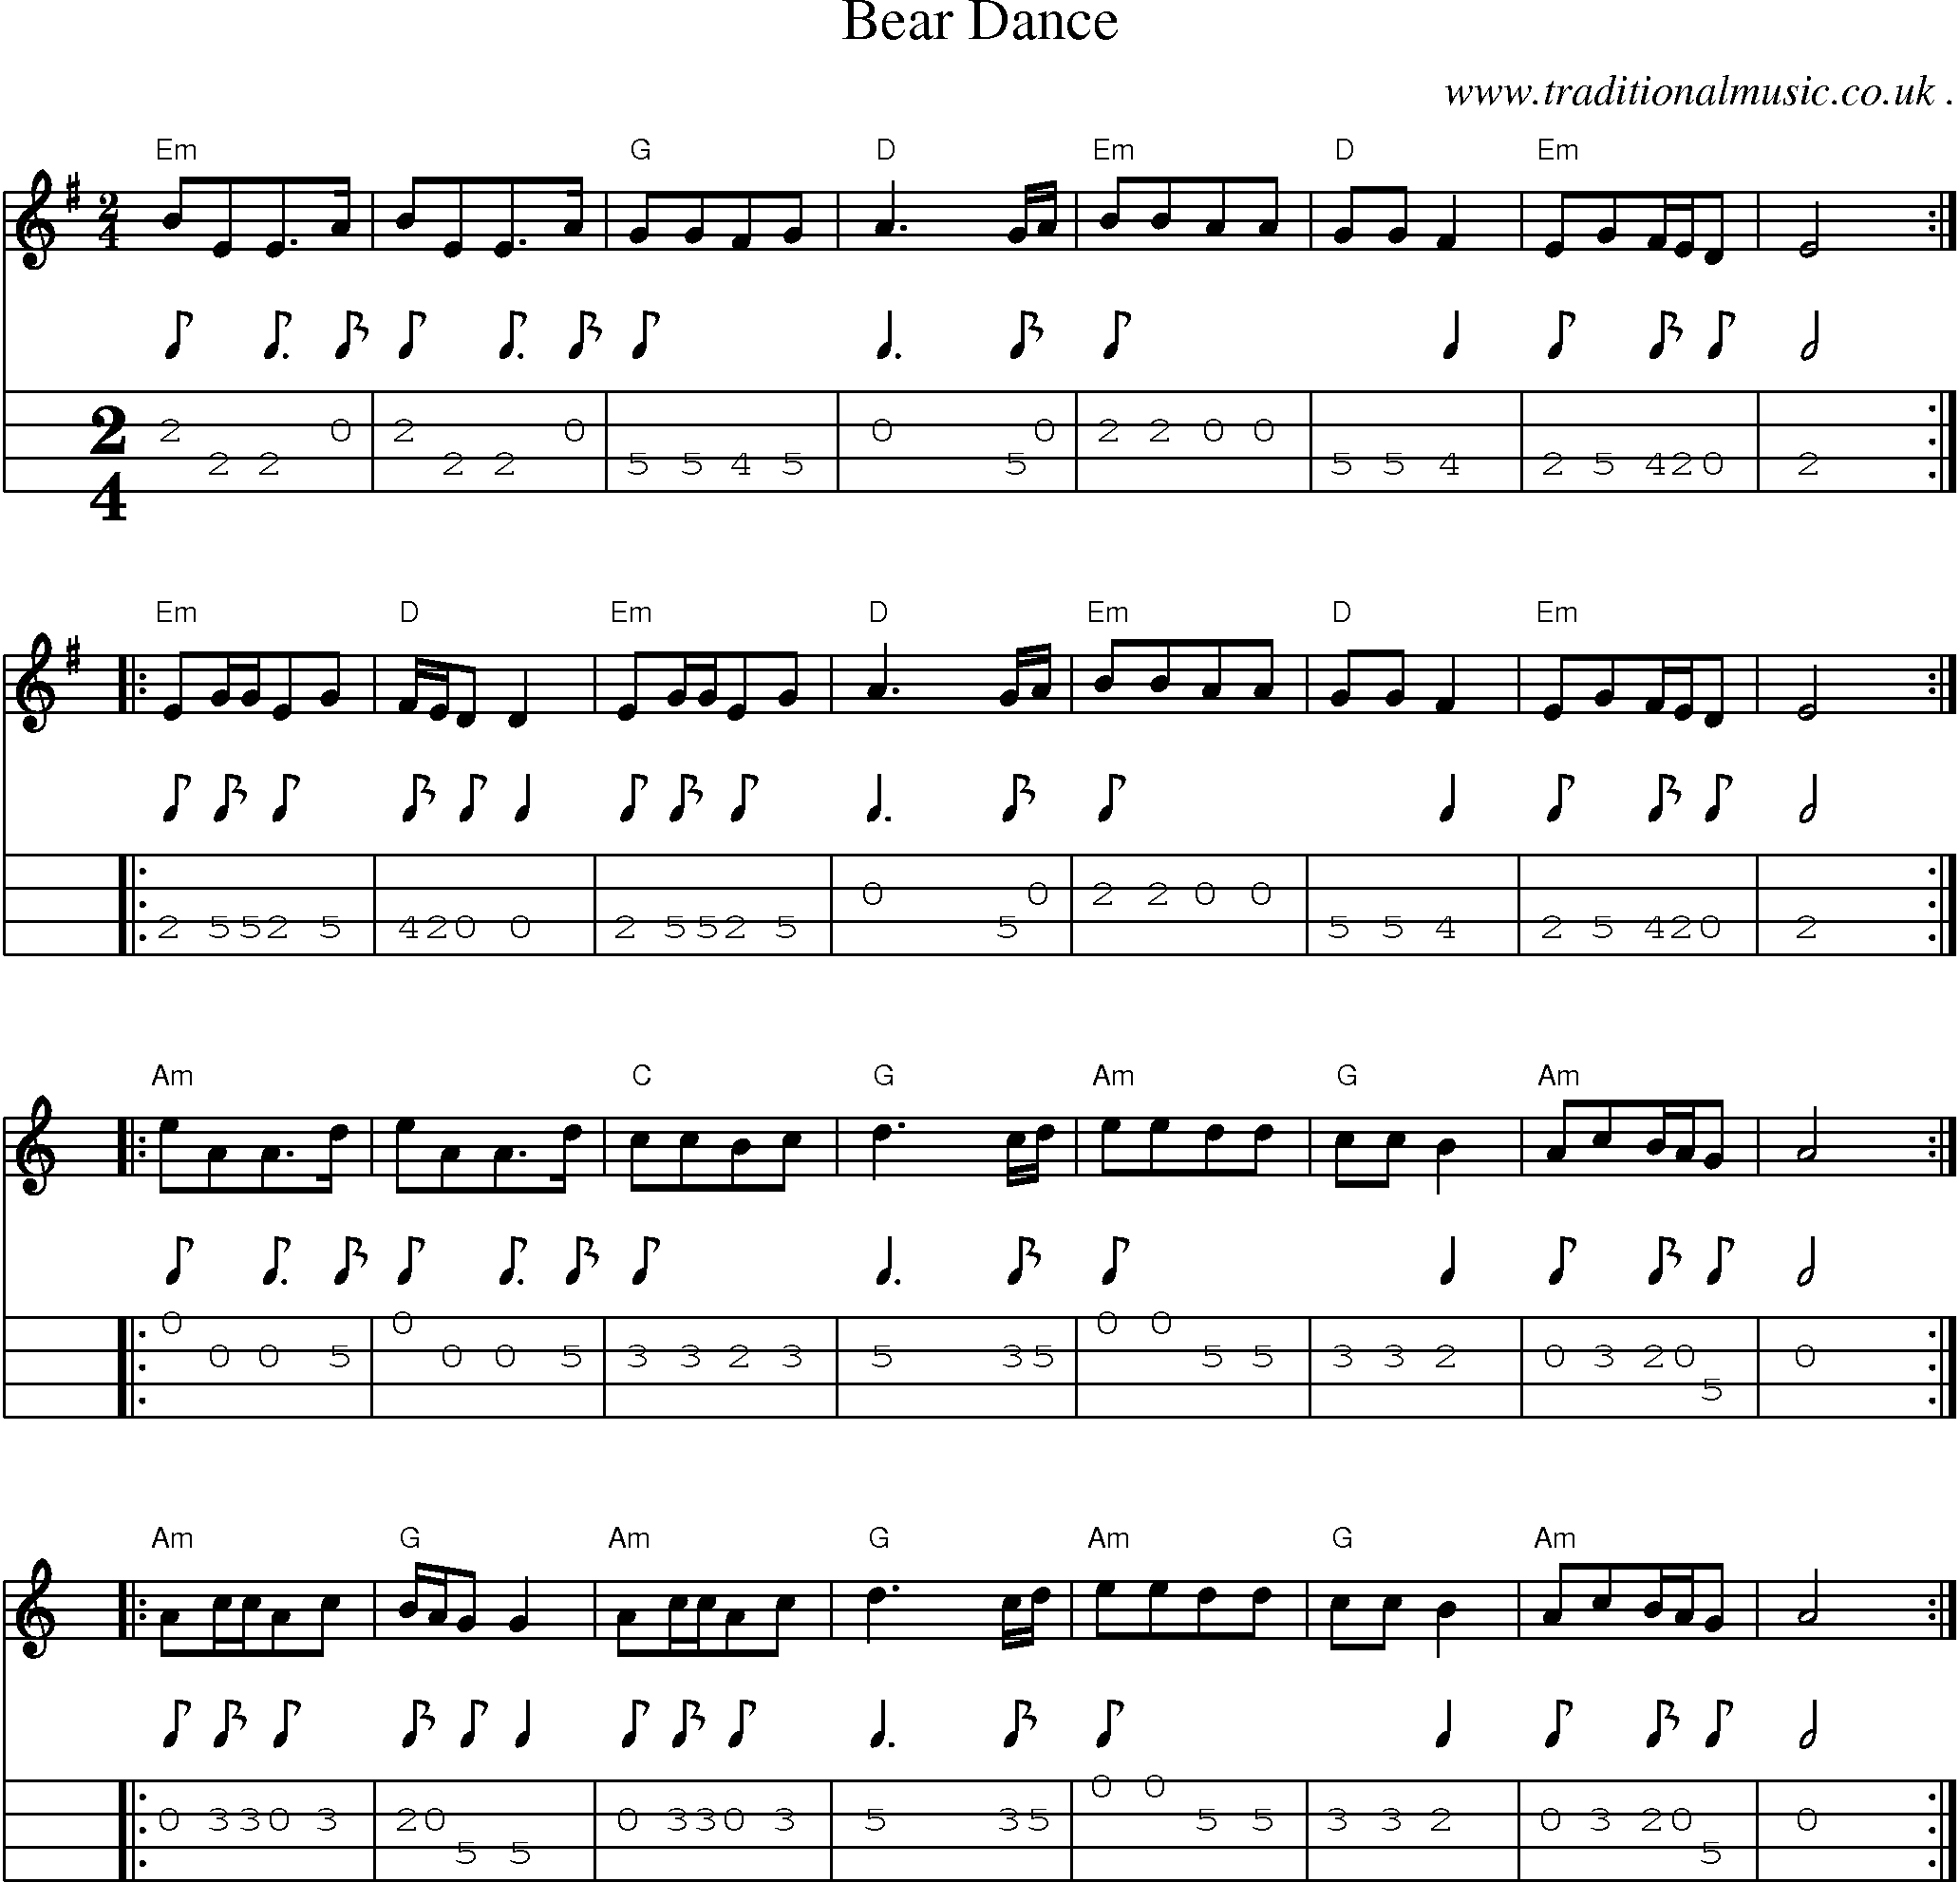 Music Score and Guitar Tabs for Bear Dance